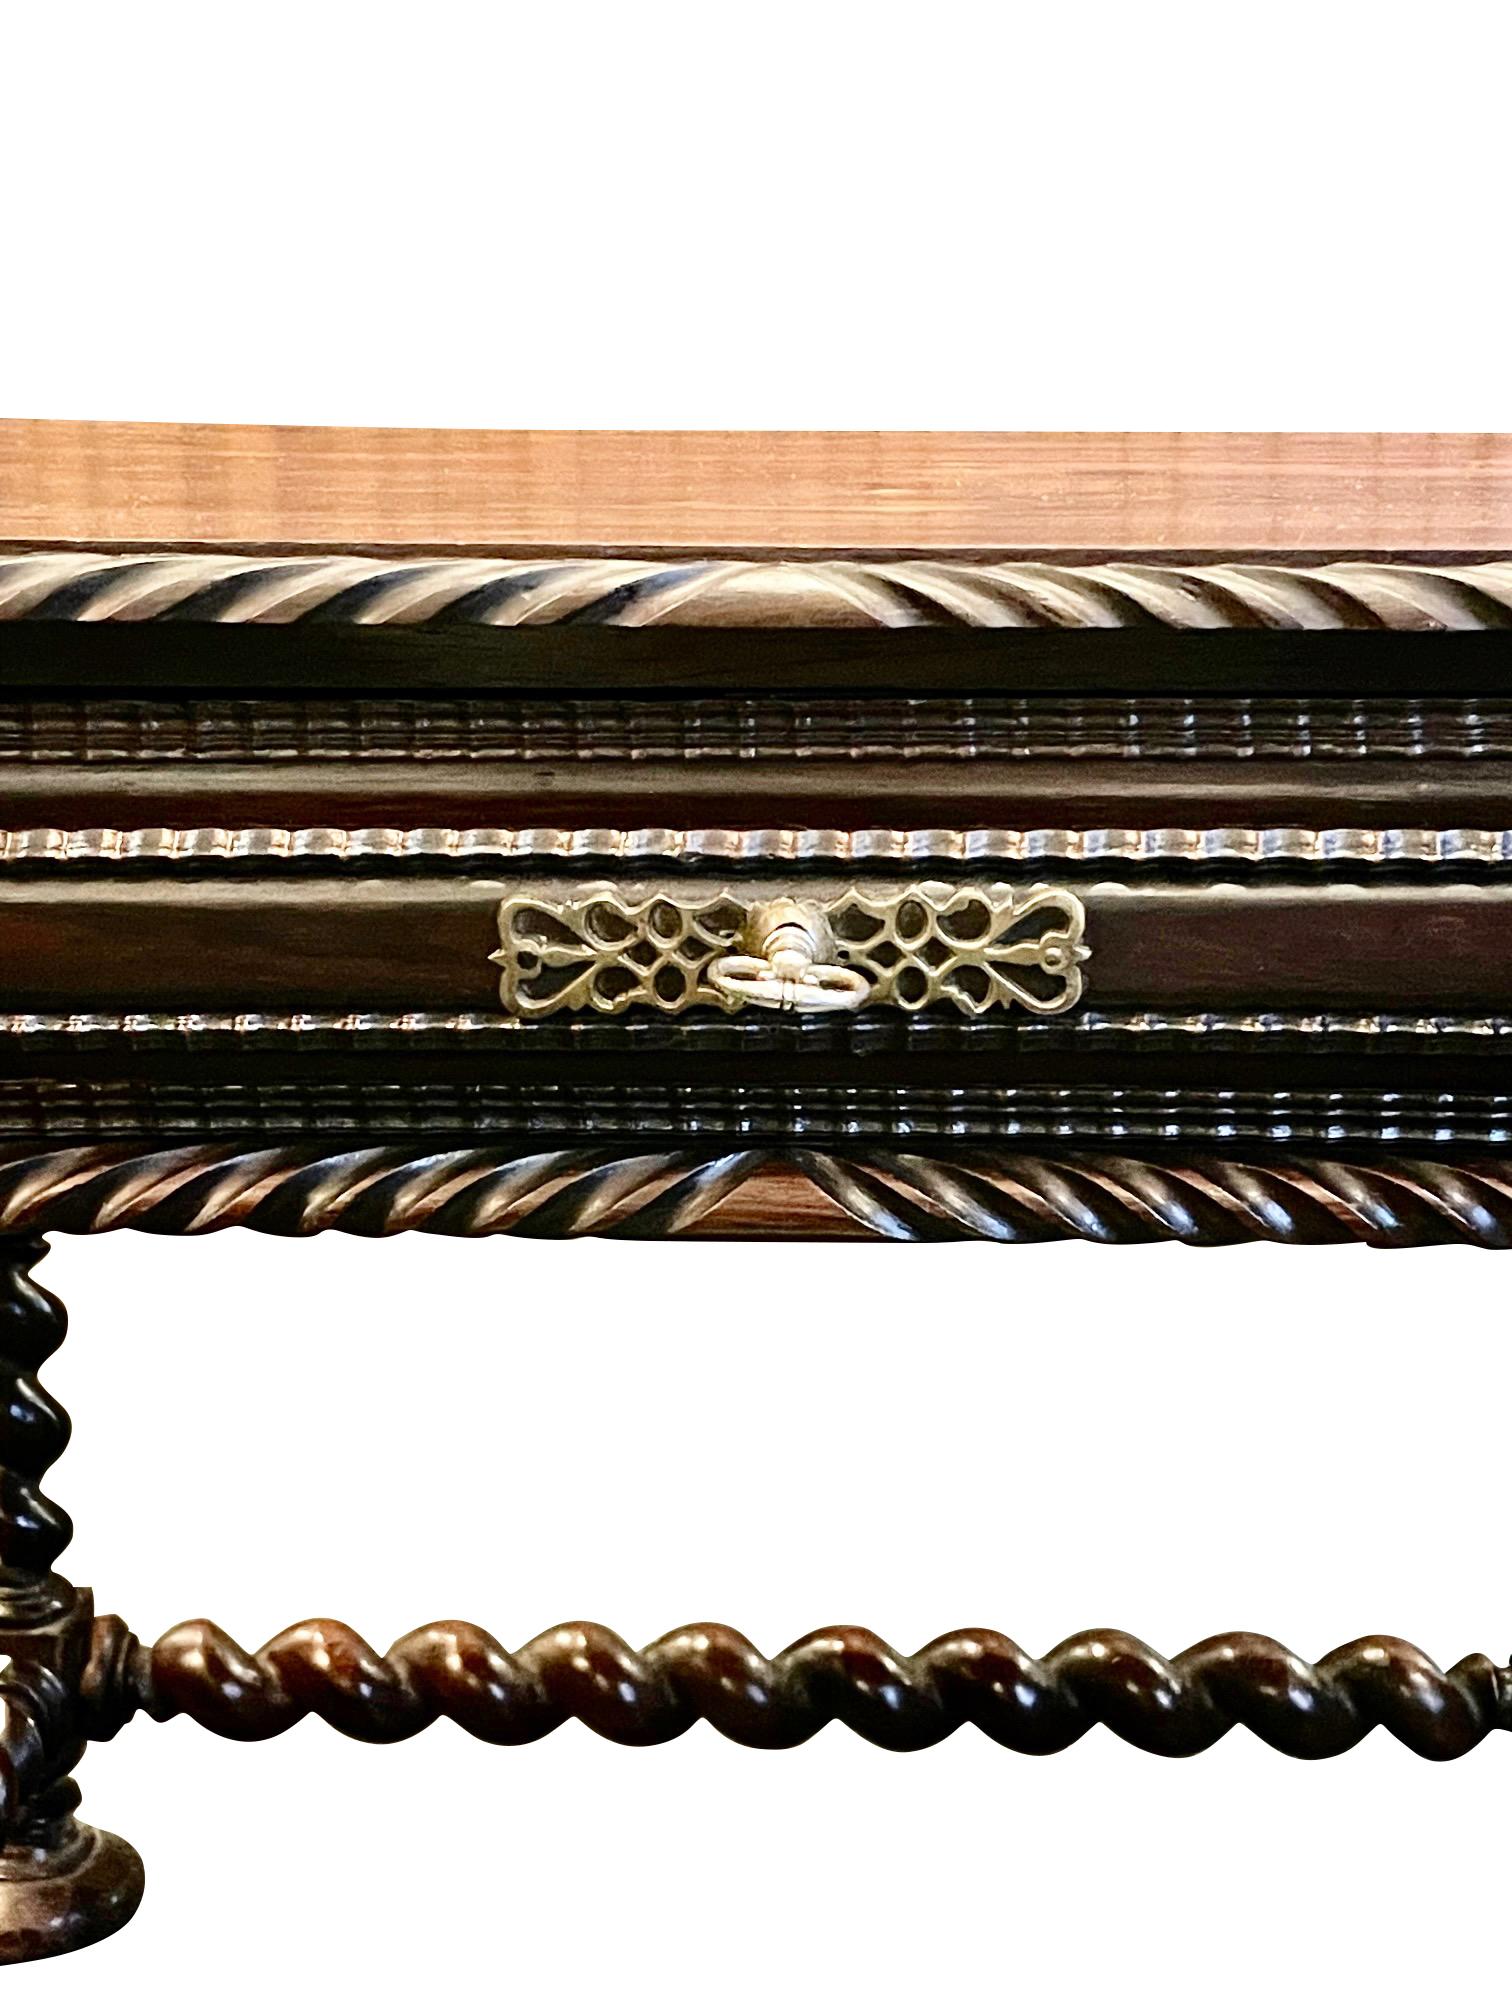 Portuguese Decorative Trim Side Table with Barley Twist Legs, Portugal, 18th Century For Sale